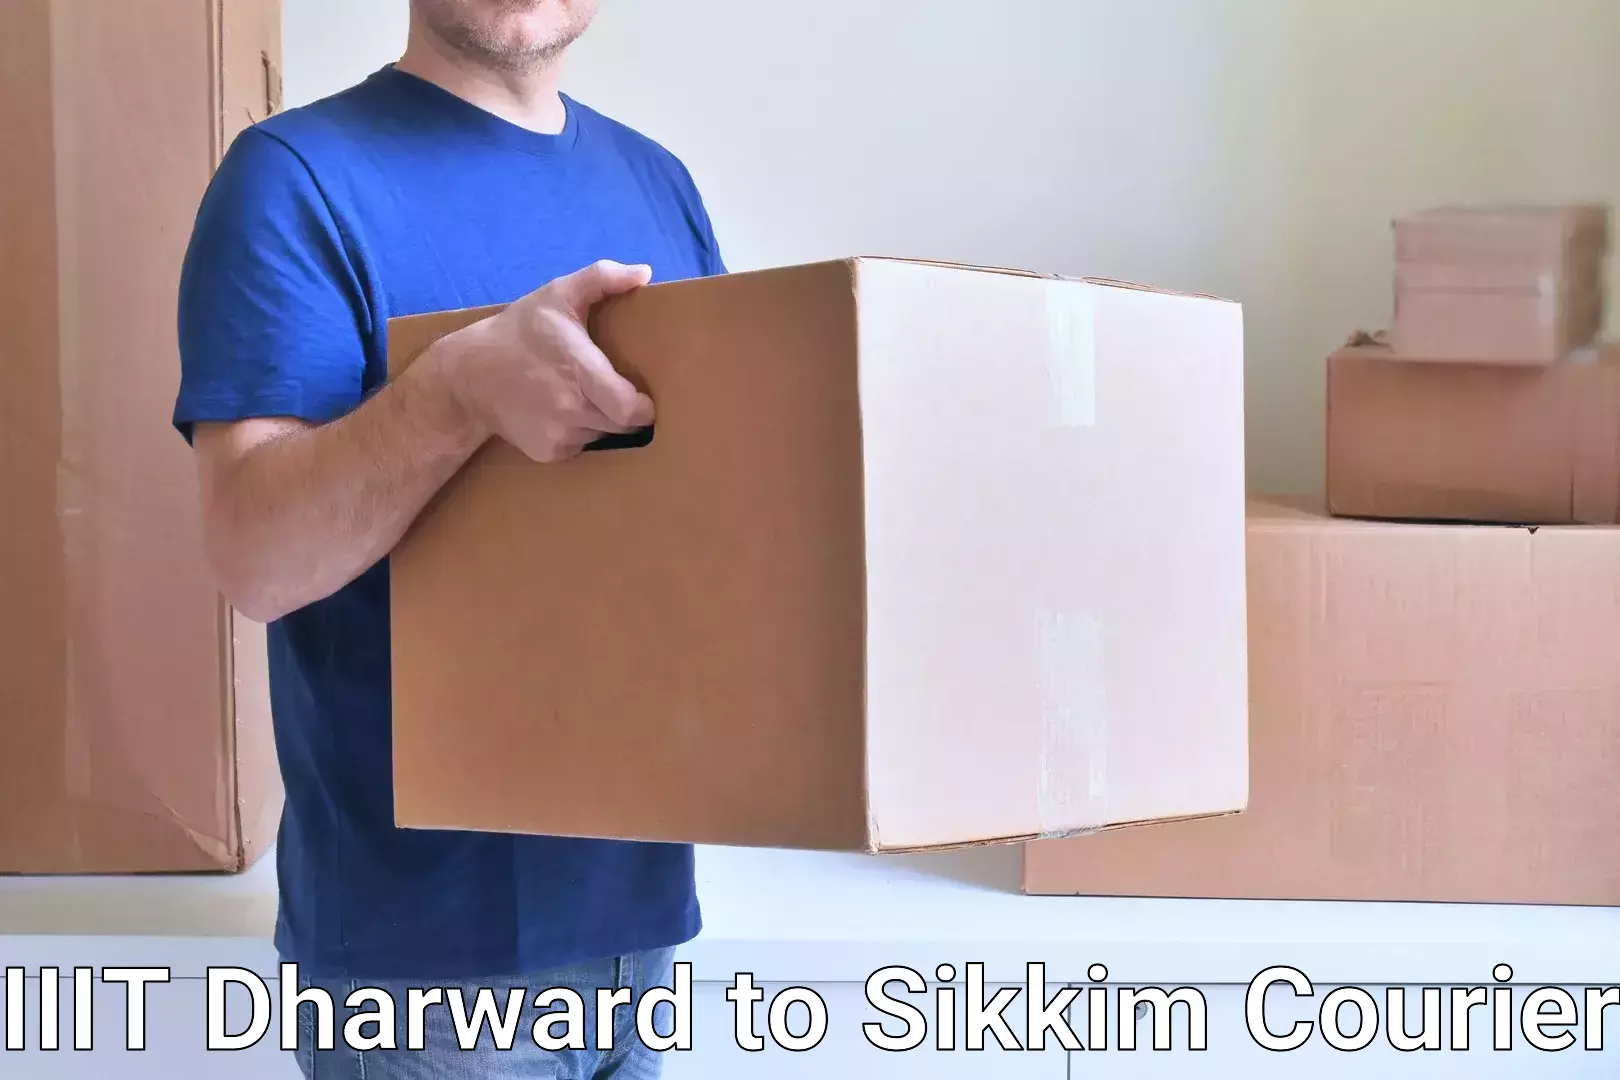 Customer-centric shipping in IIIT Dharward to Sikkim